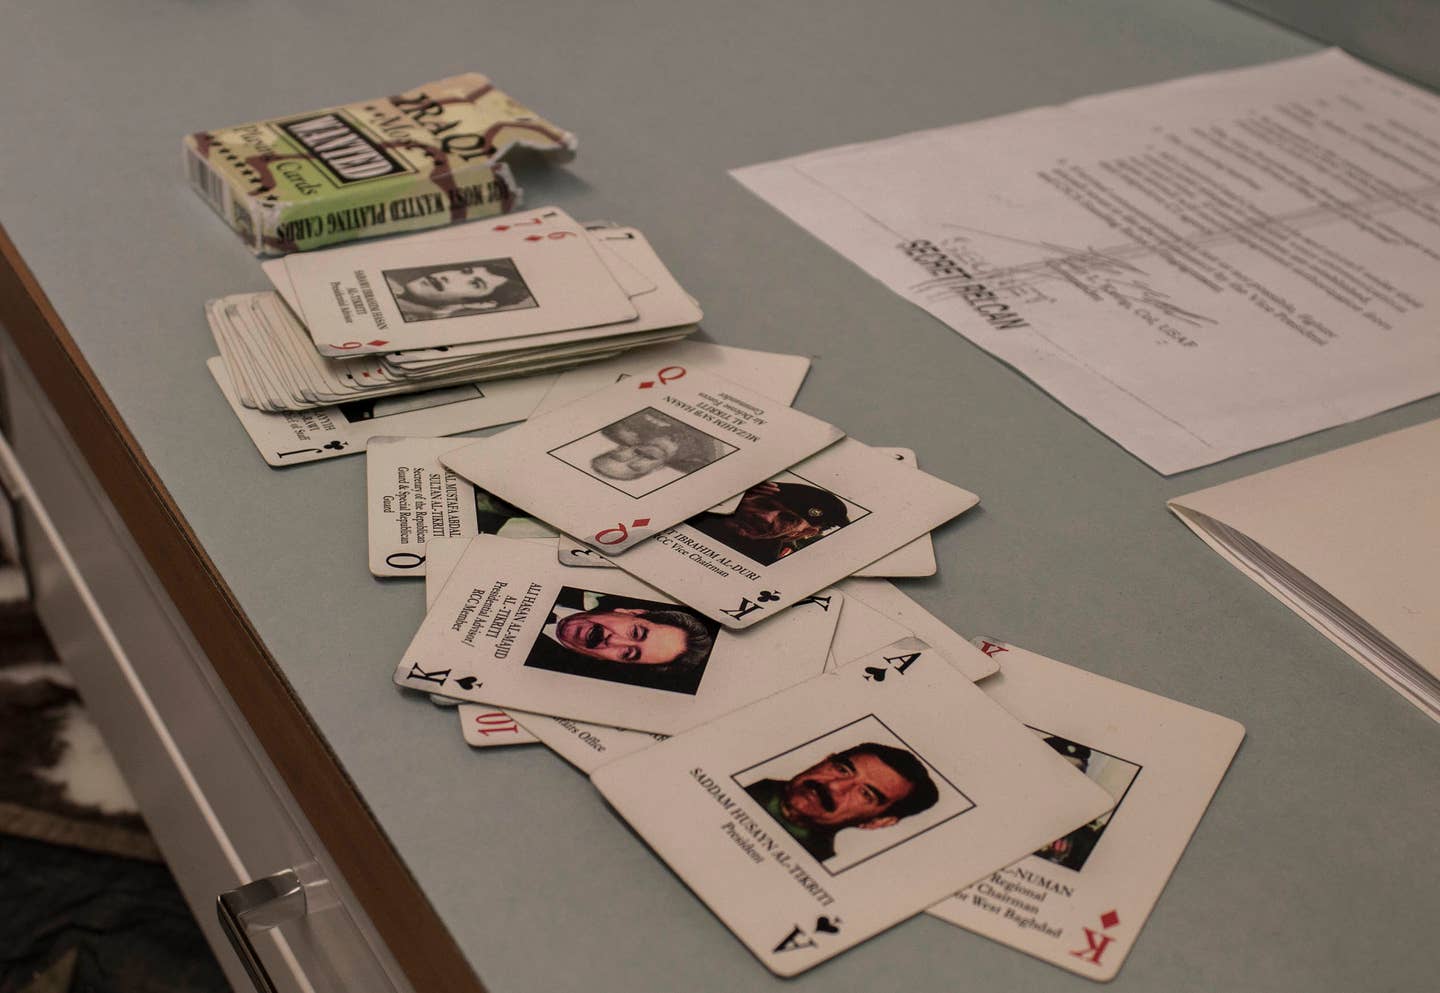 Graduate students from University of New Orleans public history department tour the Louisiana National Guard Museum April 11. A stack of playing cards displaying Iraq War's "most wanted" rests on a shelf in the museum's archive department.  (U.S. Army photo by Sgt. Karen Sampson/Released)